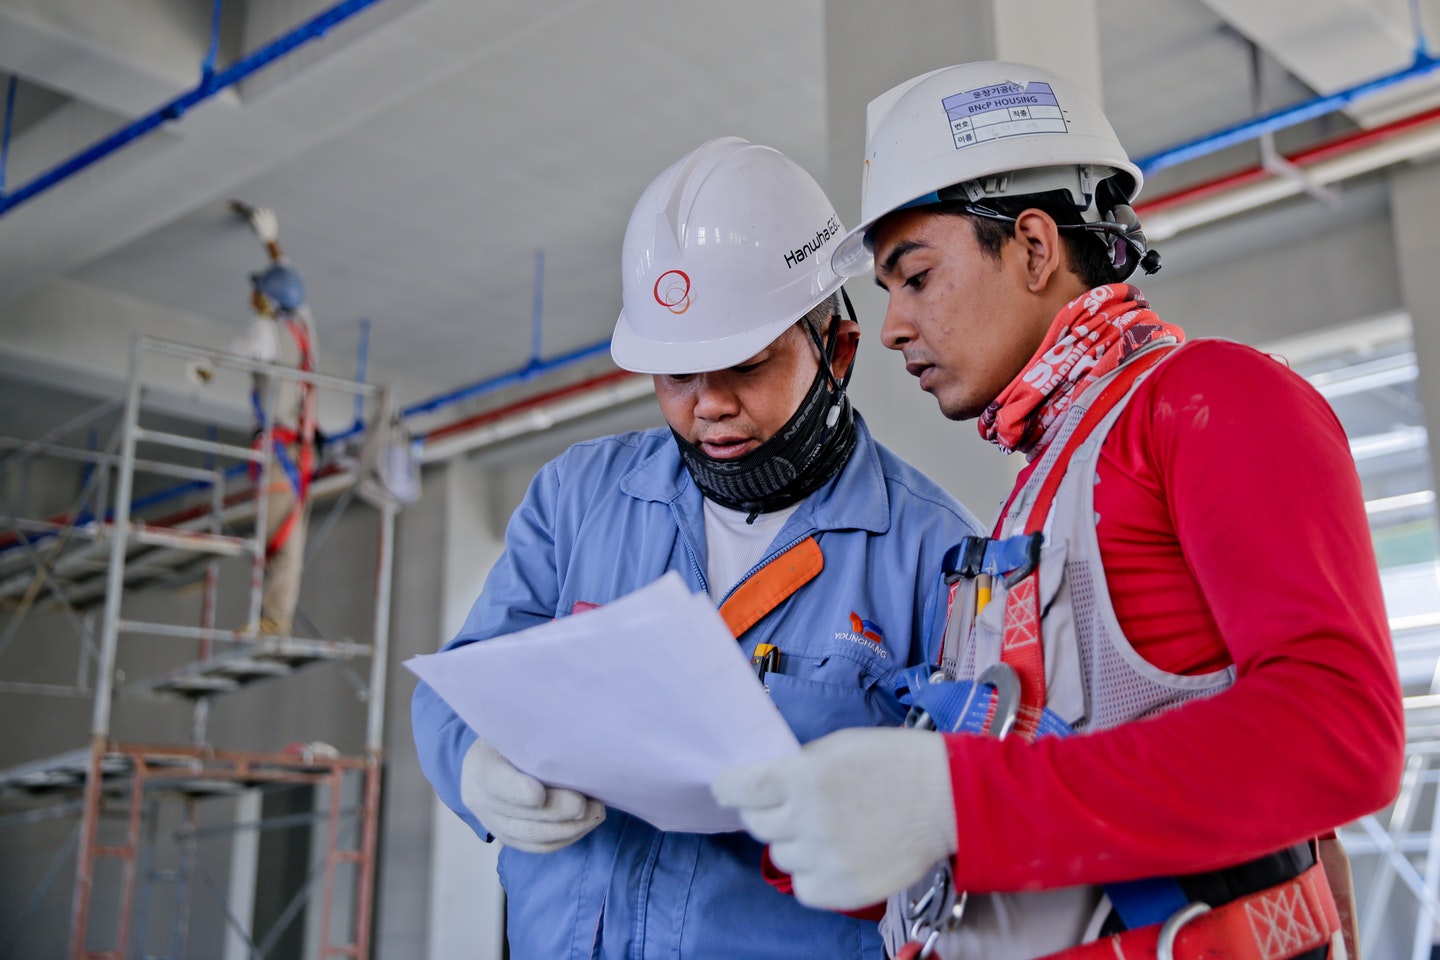 Two workers are reviewing a document while wearing safety gear